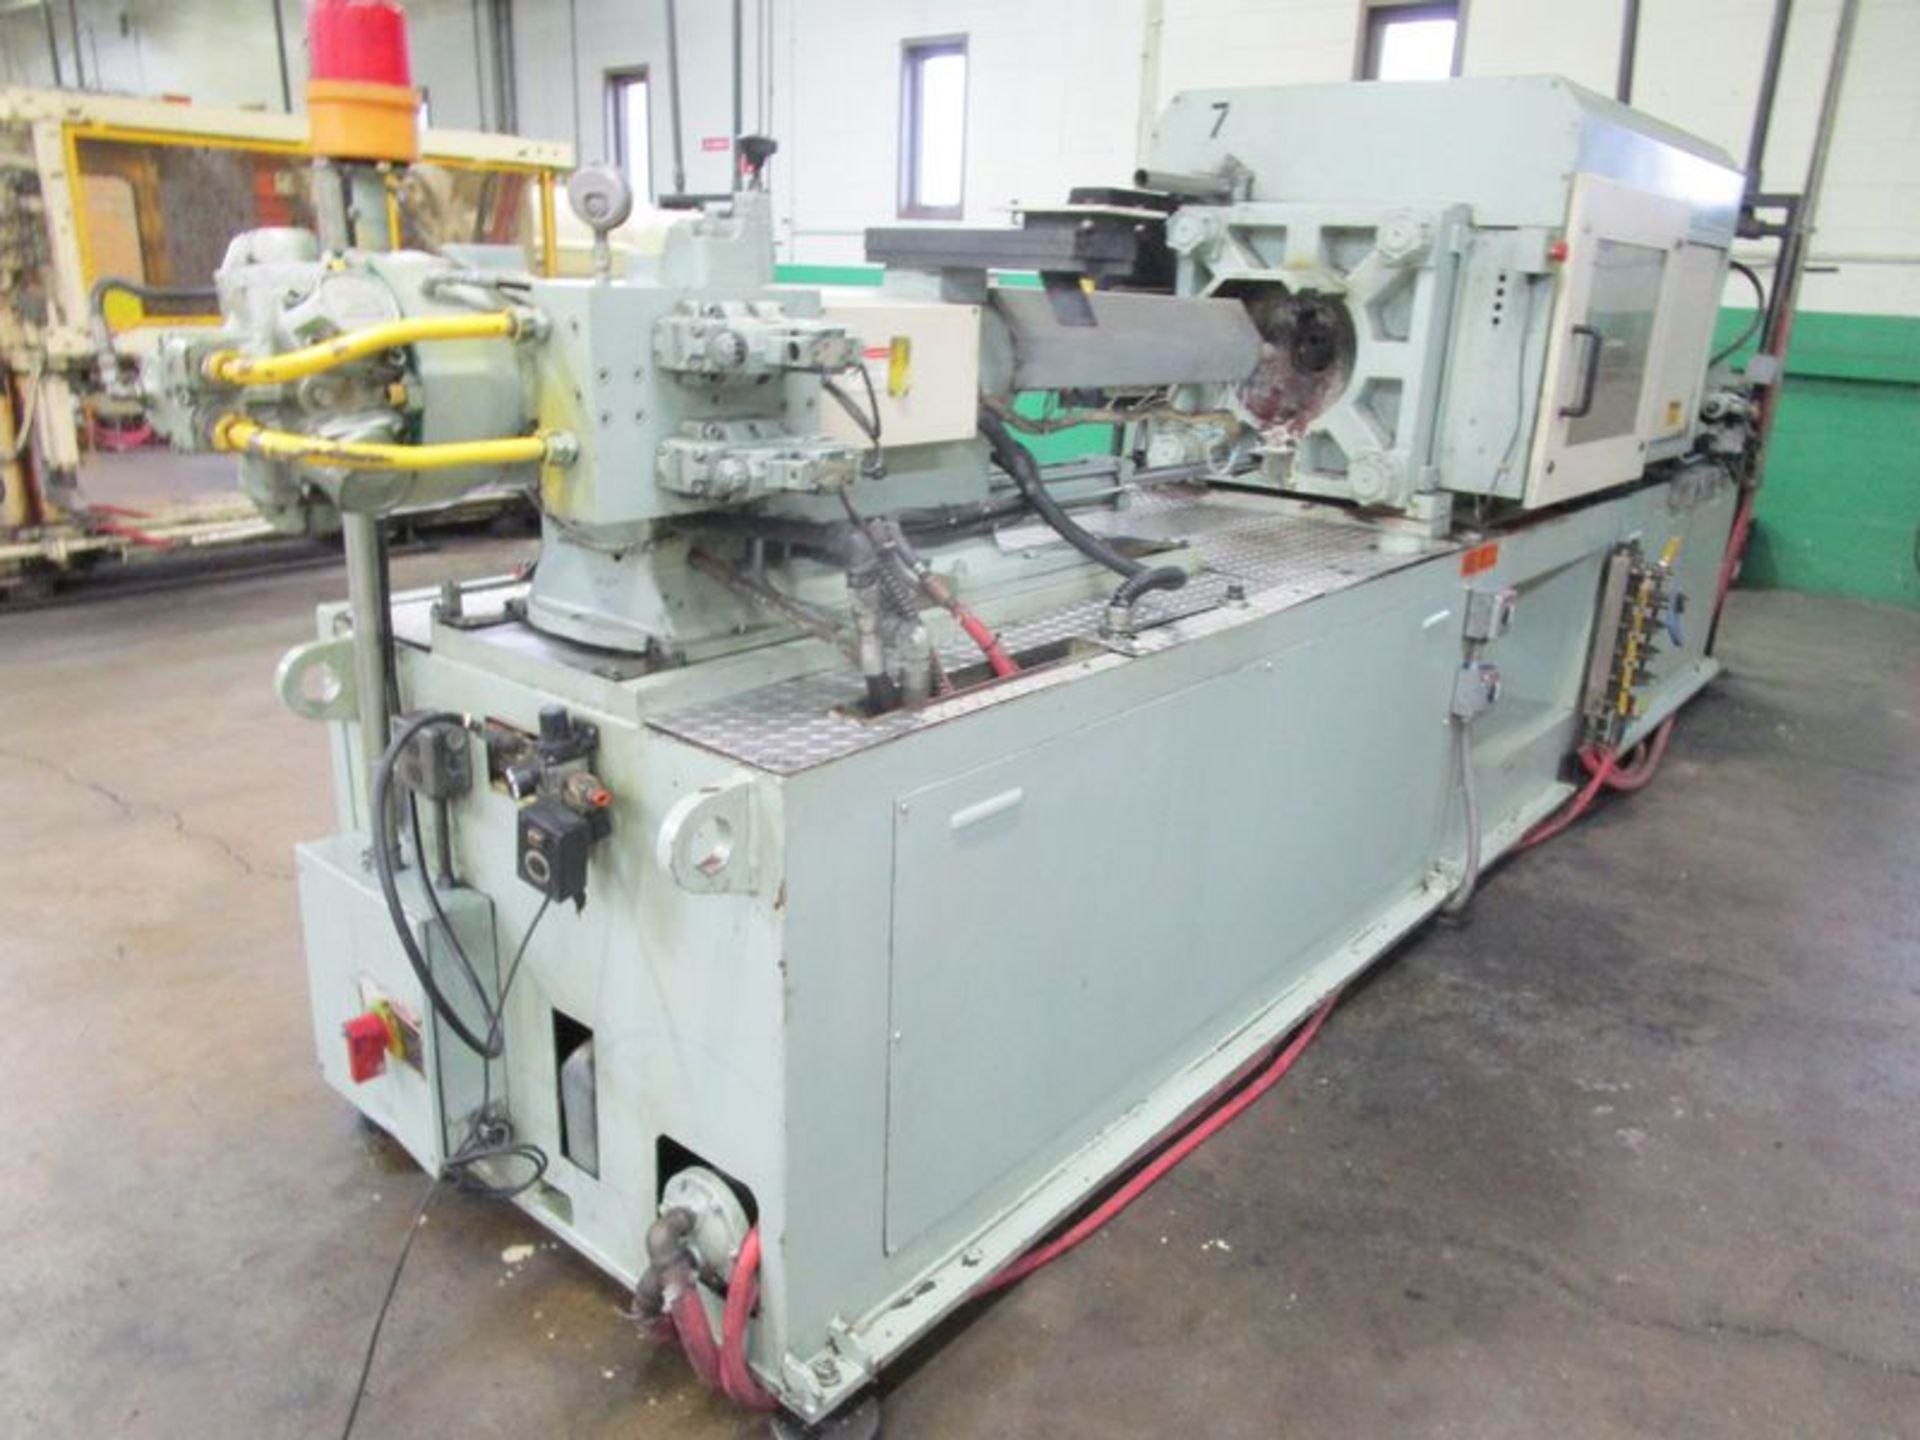 Nissin NC-145-FX2C 145-Ton Plastic Injection Molding Machine, S/N 95-145-13, 1995 - Image 8 of 9